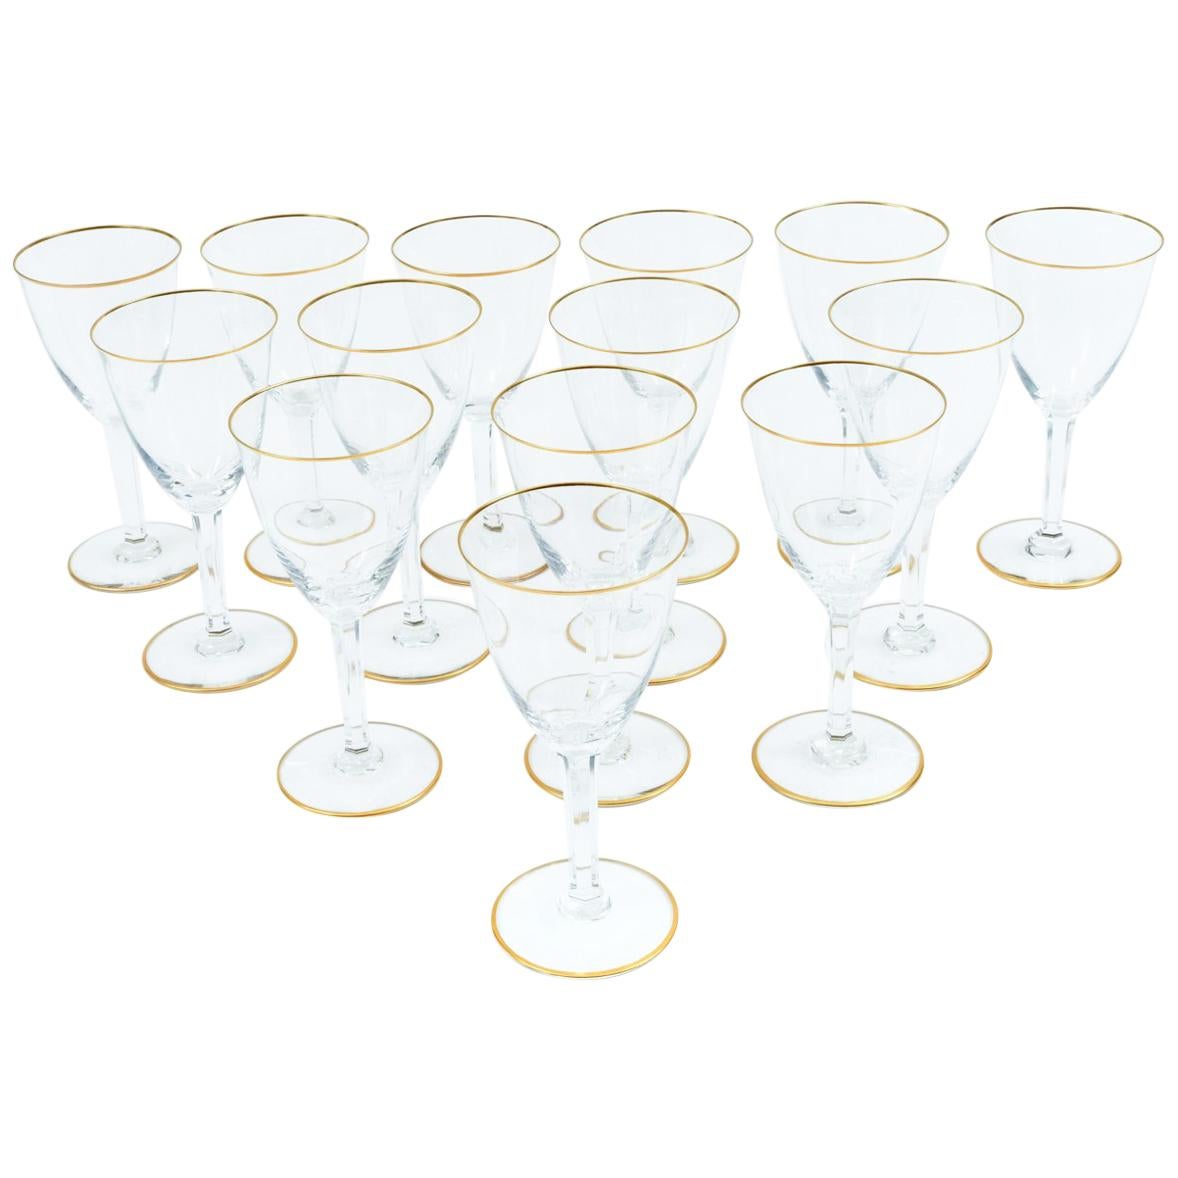 Vintage Baccarat Crystal White Wine Service for 14 People